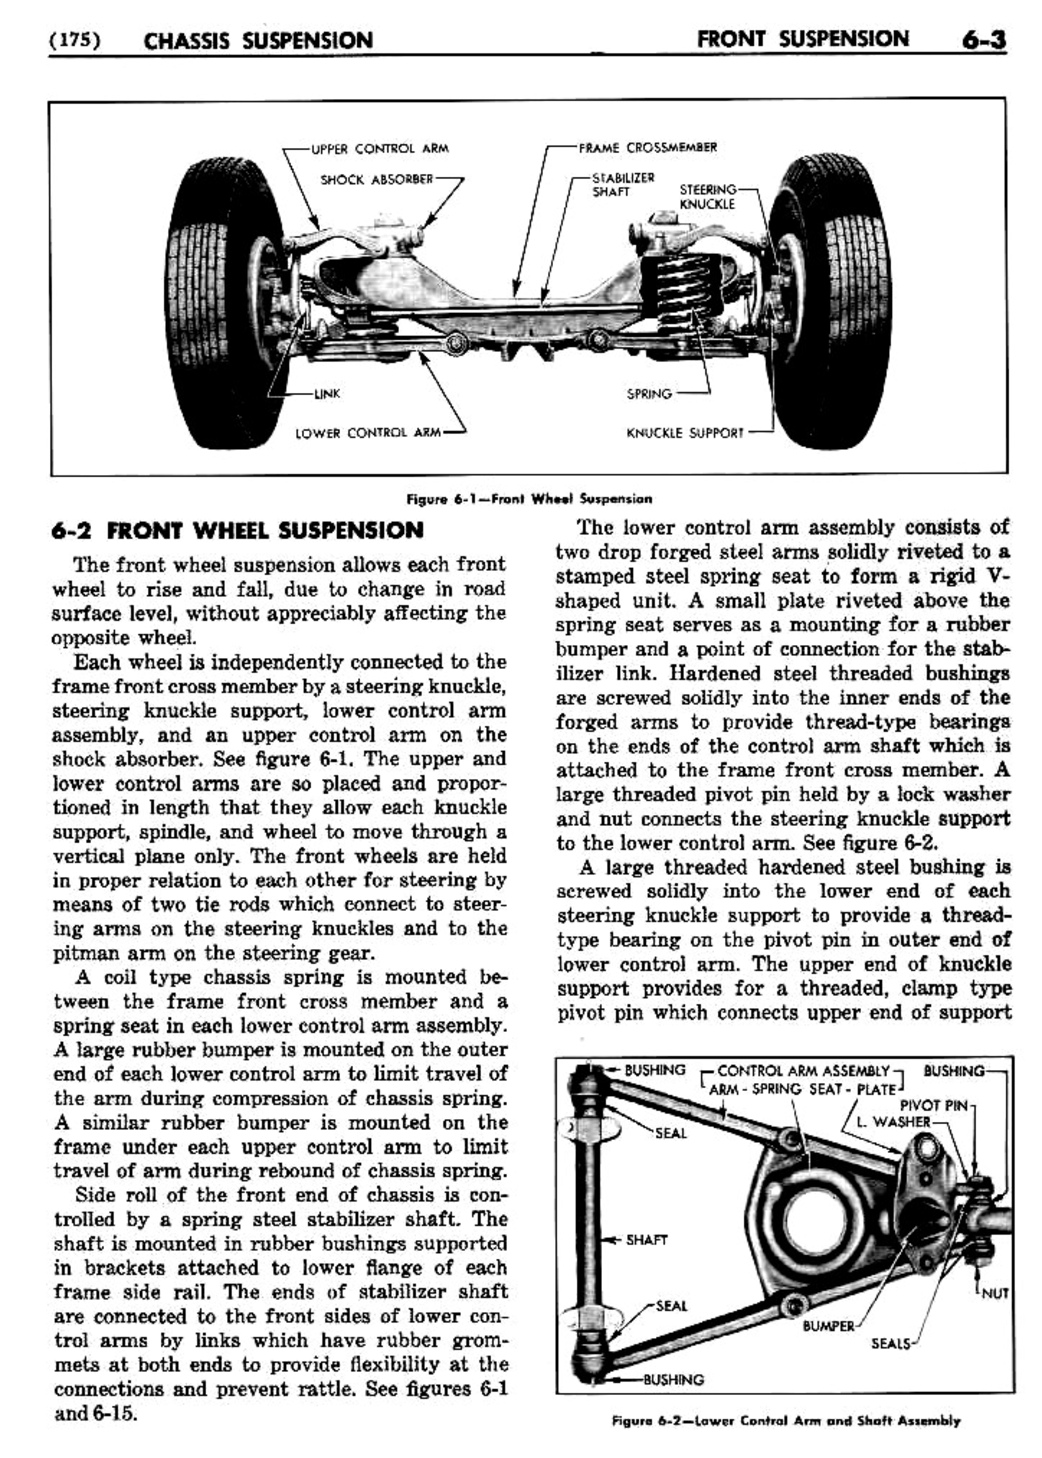 n_07 1950 Buick Shop Manual - Chassis Suspension-003-003.jpg